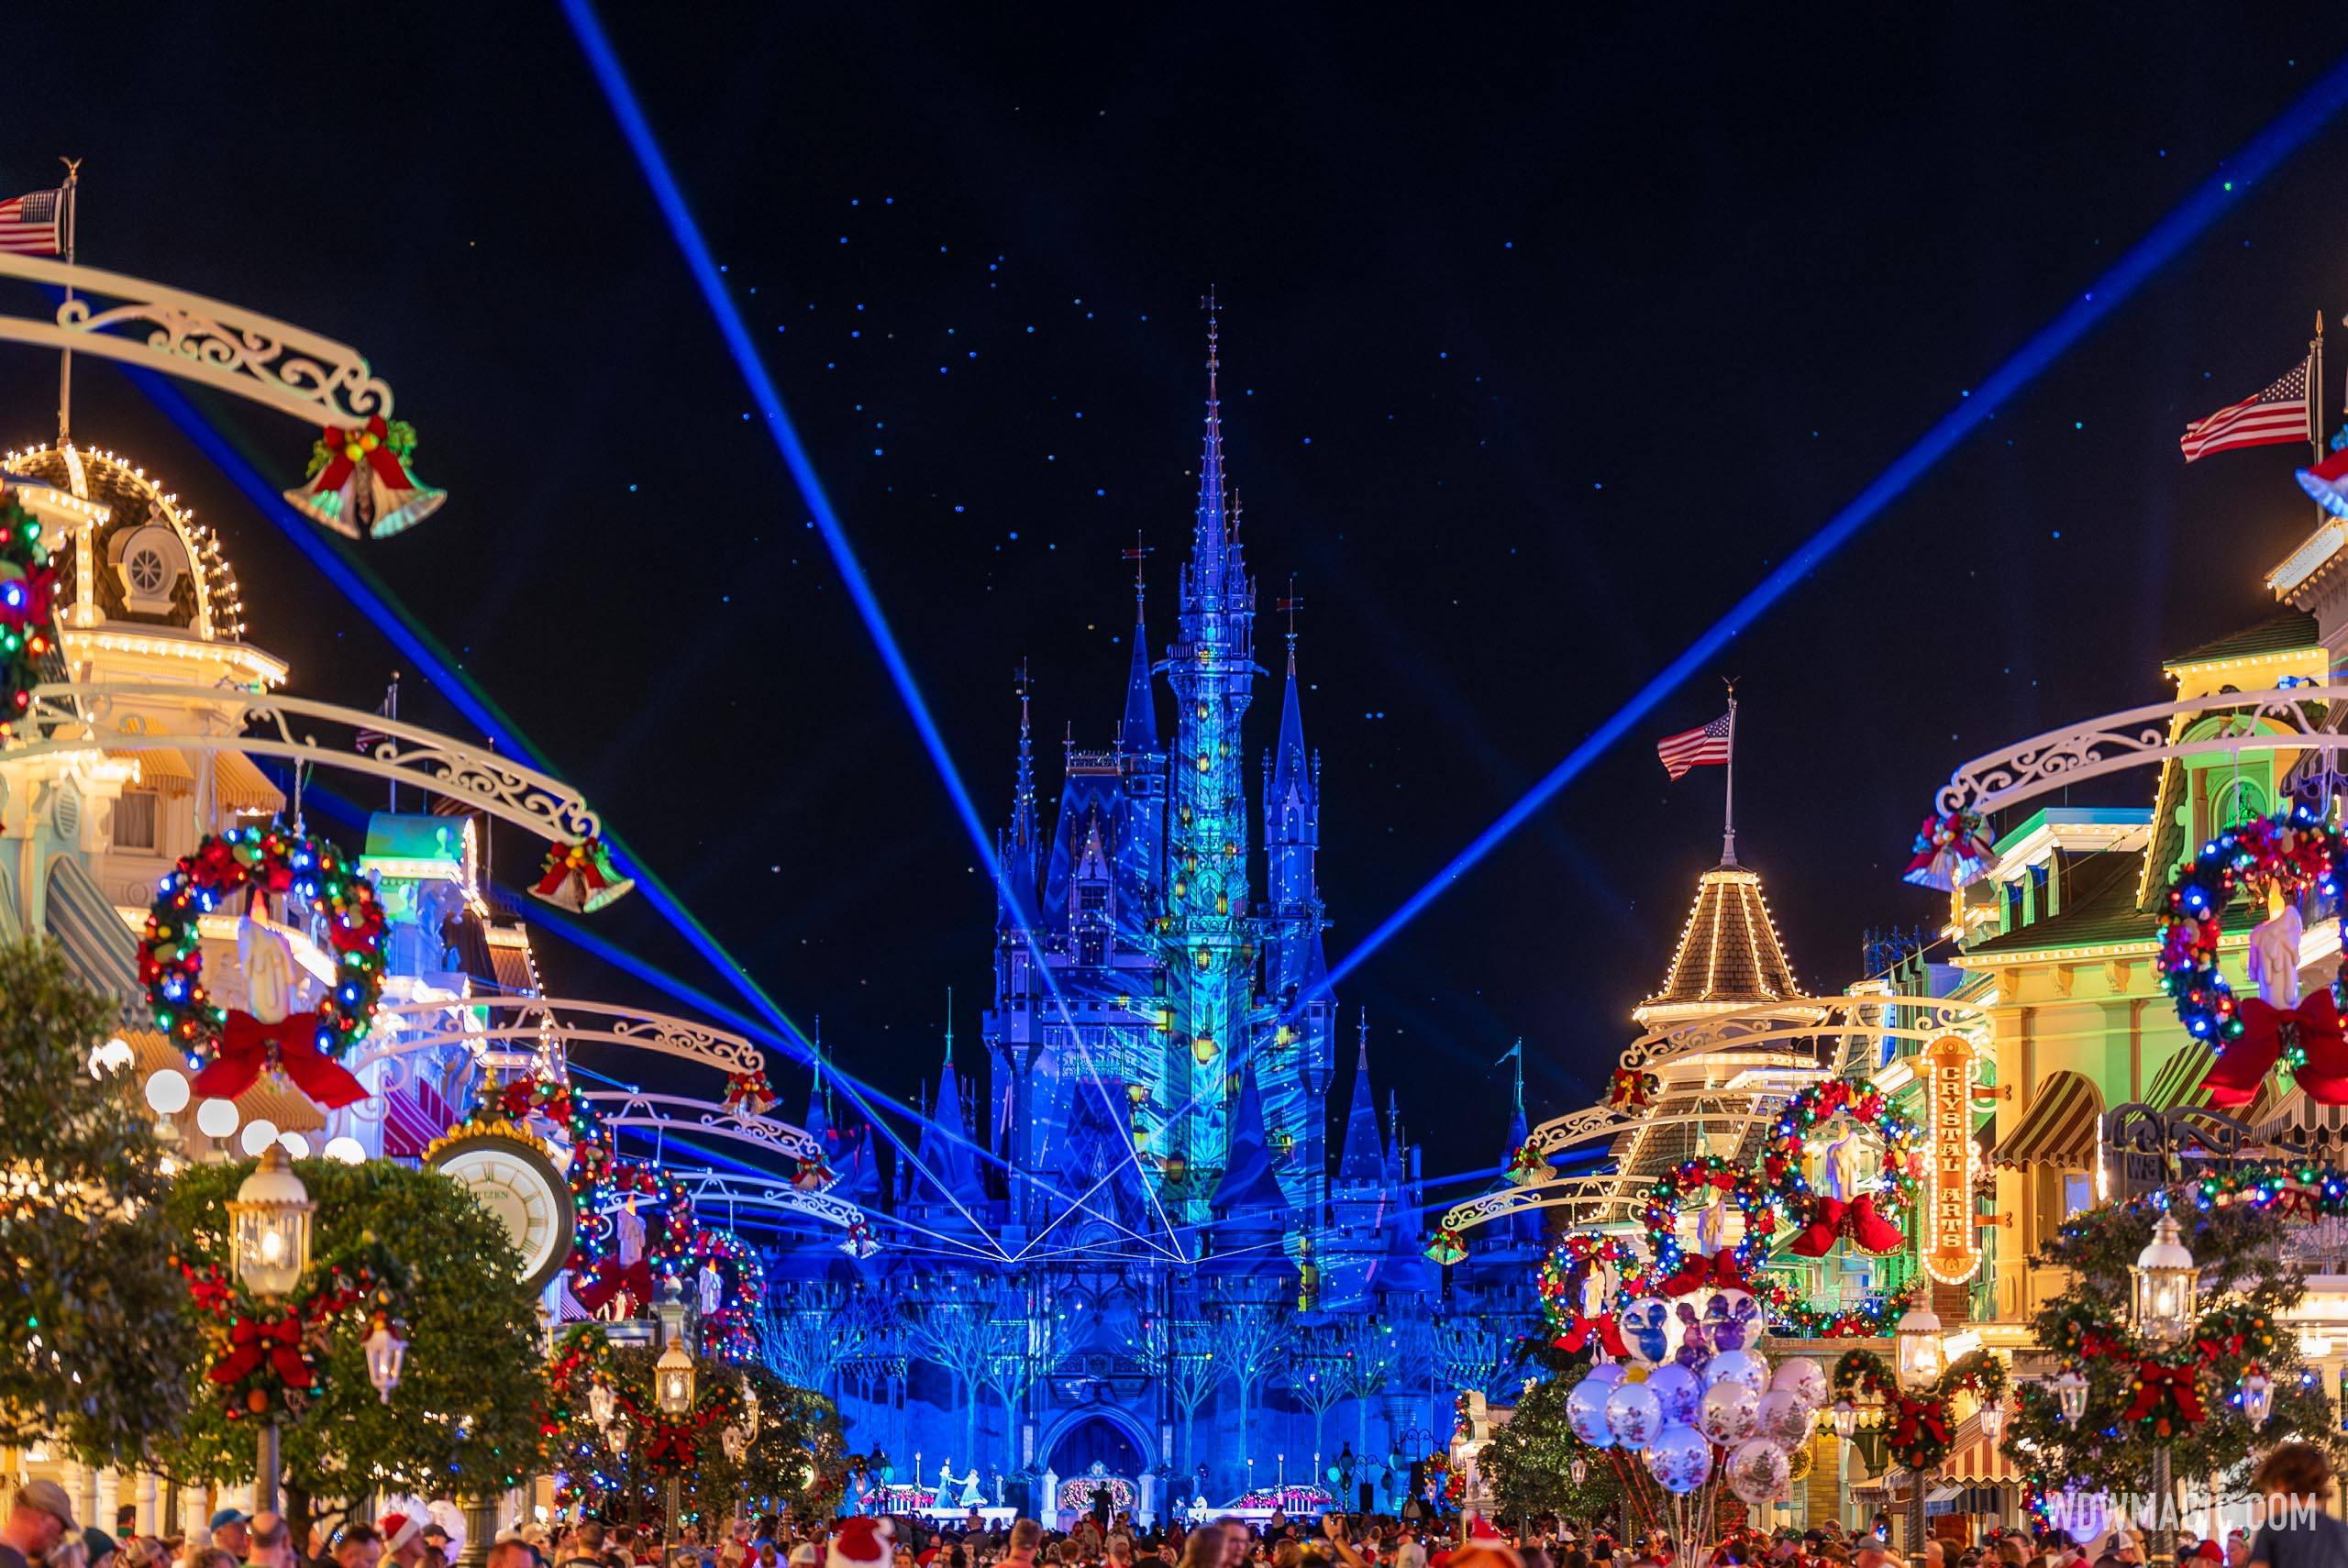 Christmas Day and New Year's Eve are two of the busiest days of the year at Walt Disney World